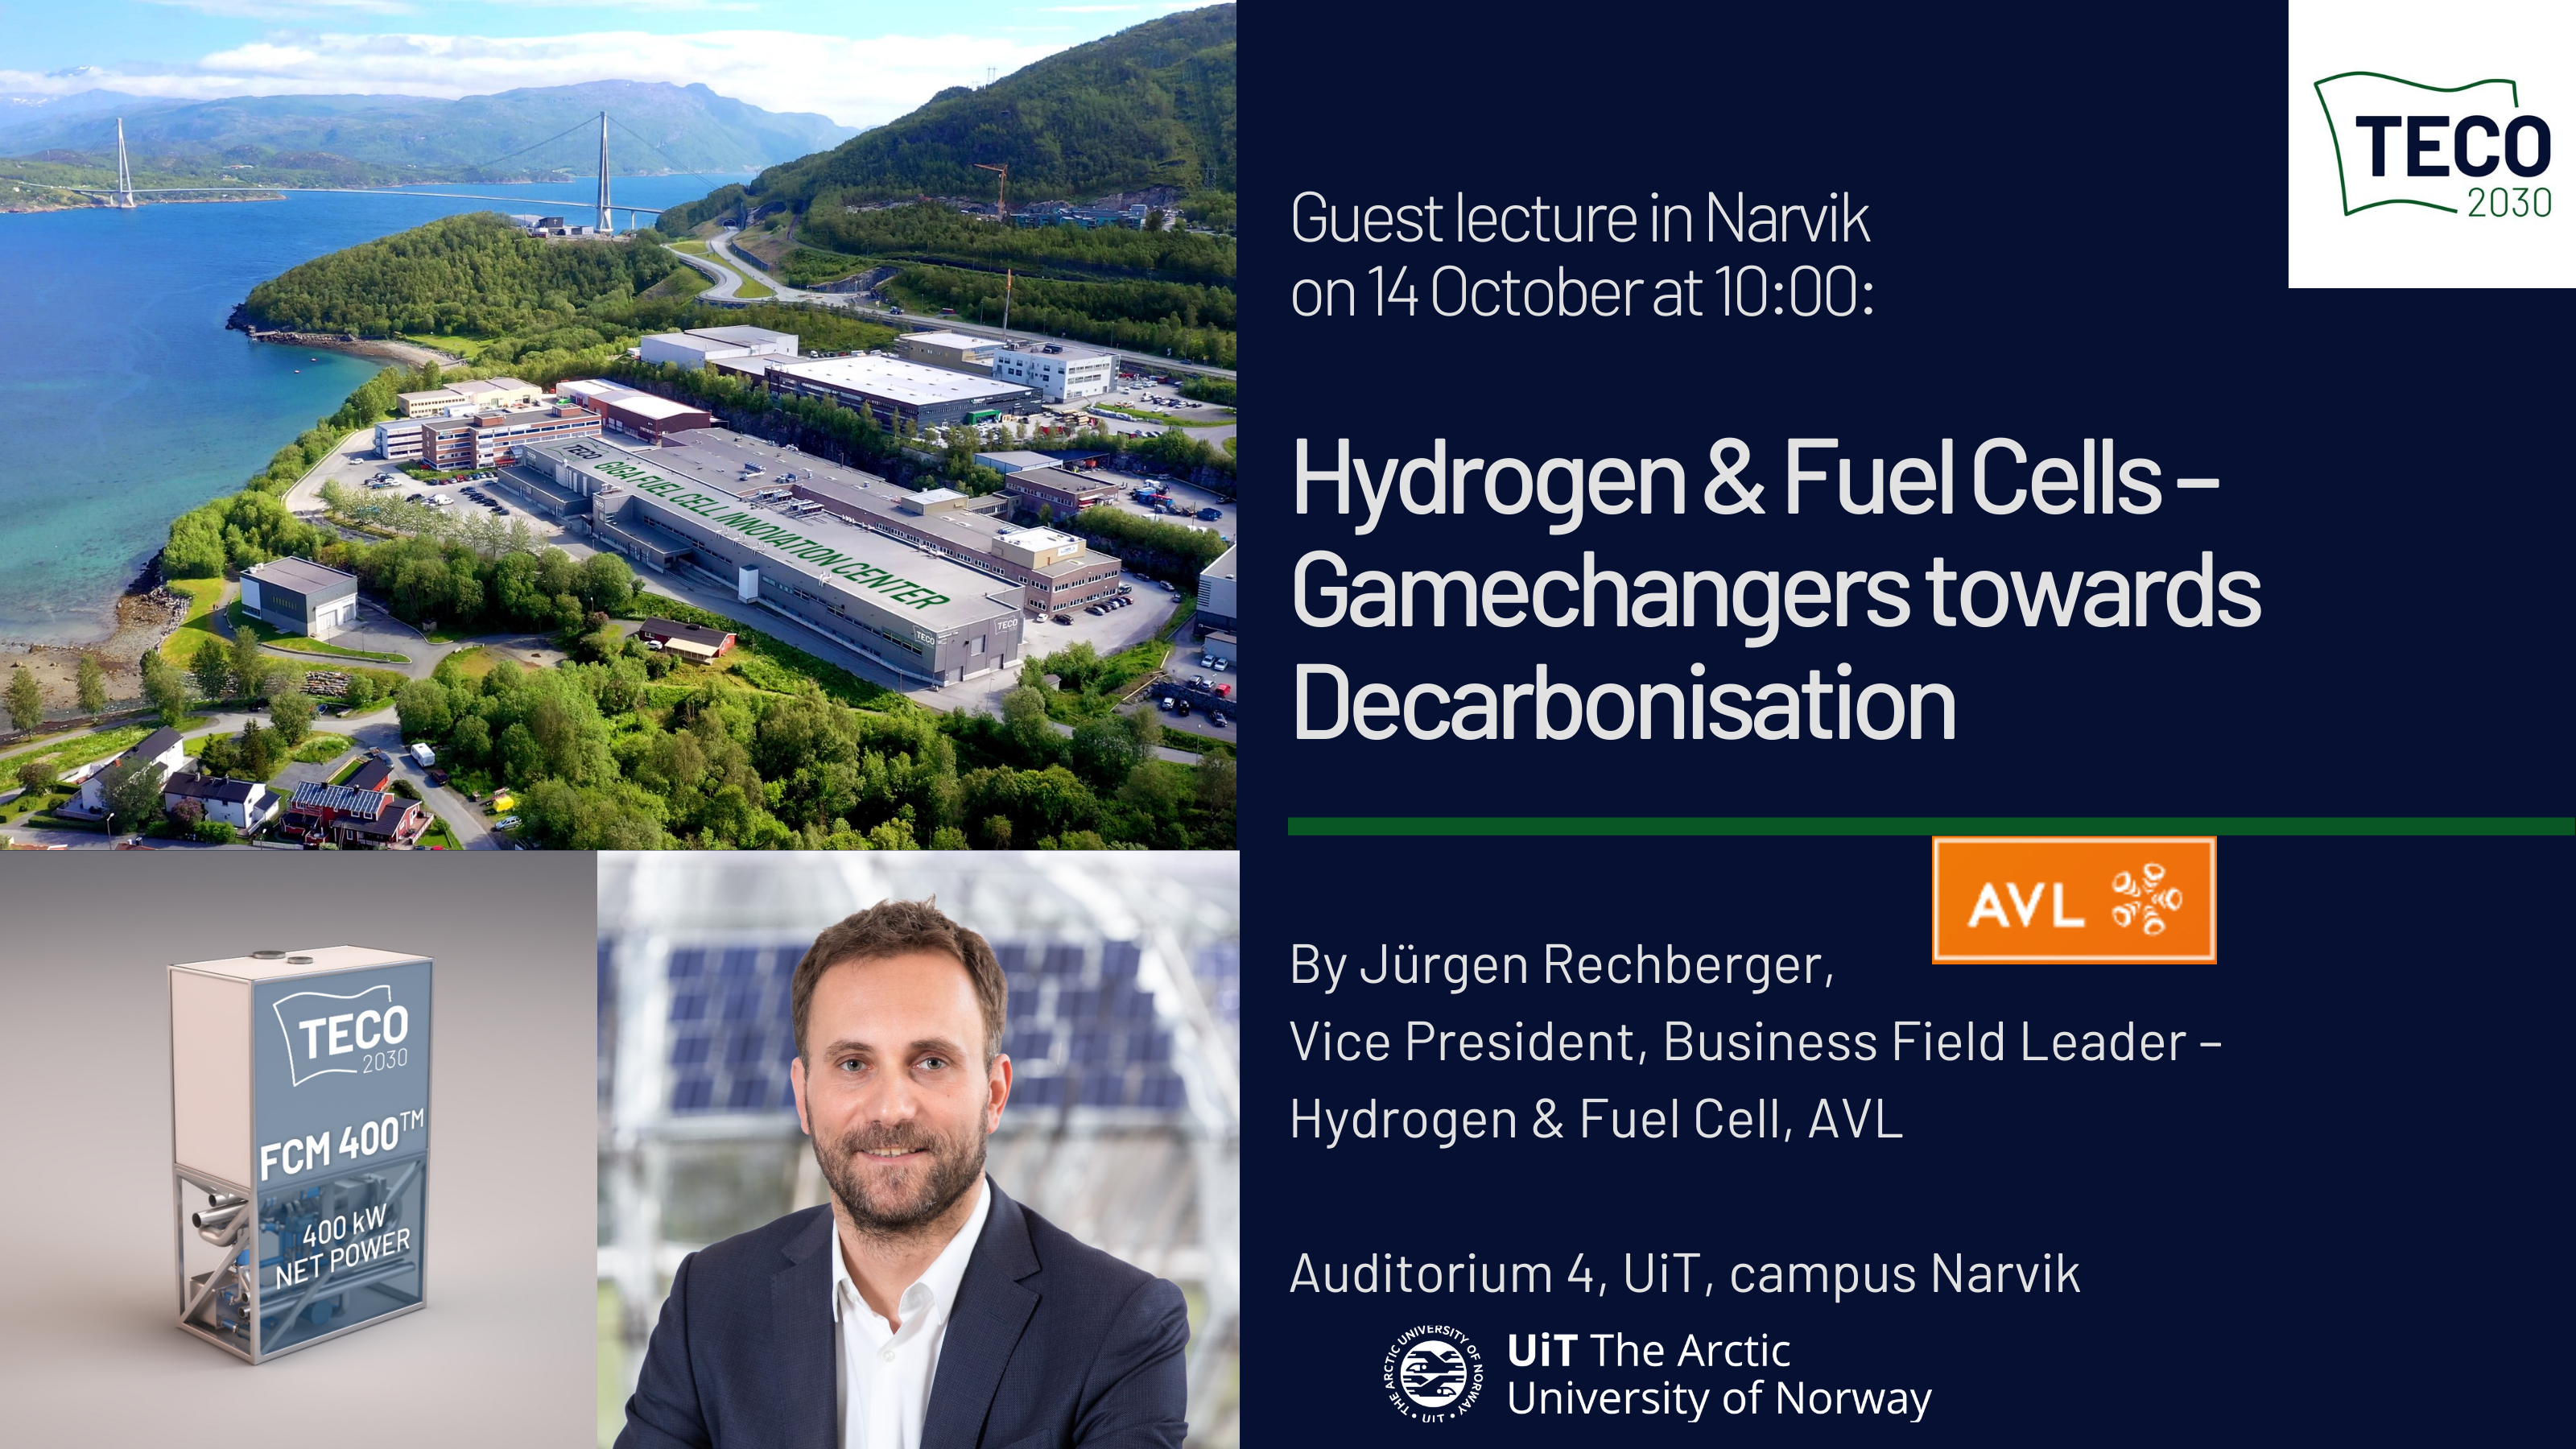 TECO 2030 is organising a guest lecture in Narvik on 14 October with Jürgen Rechberger from AVL. If you’re in the area then, do not miss out on this chance to learn all you need to know about hydrogen fuel cells from one of the world’s leading experts on the topic!